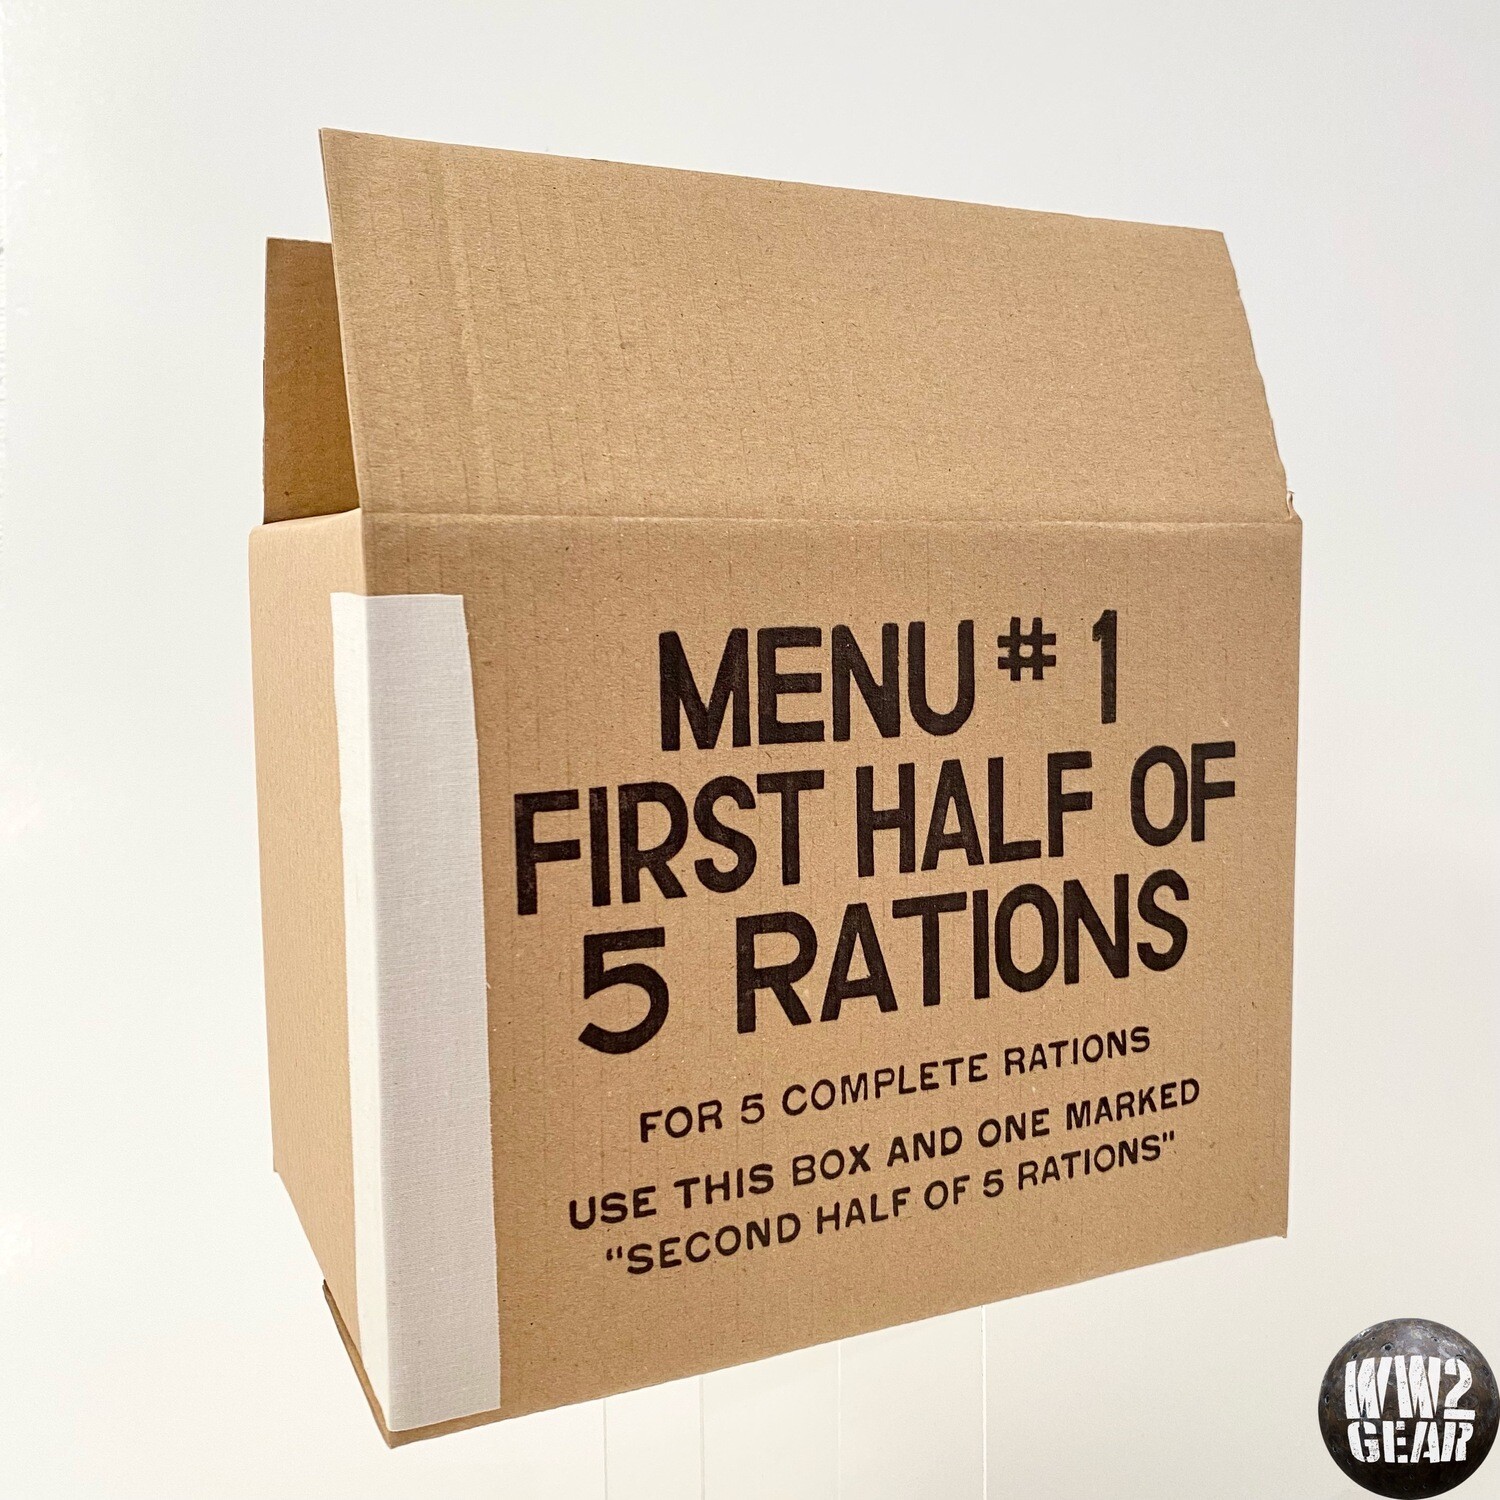 US WW2 10-in-1 Ration Cardboard Box "FIRST HALF OF 5 RATIONS" (Reproduction)